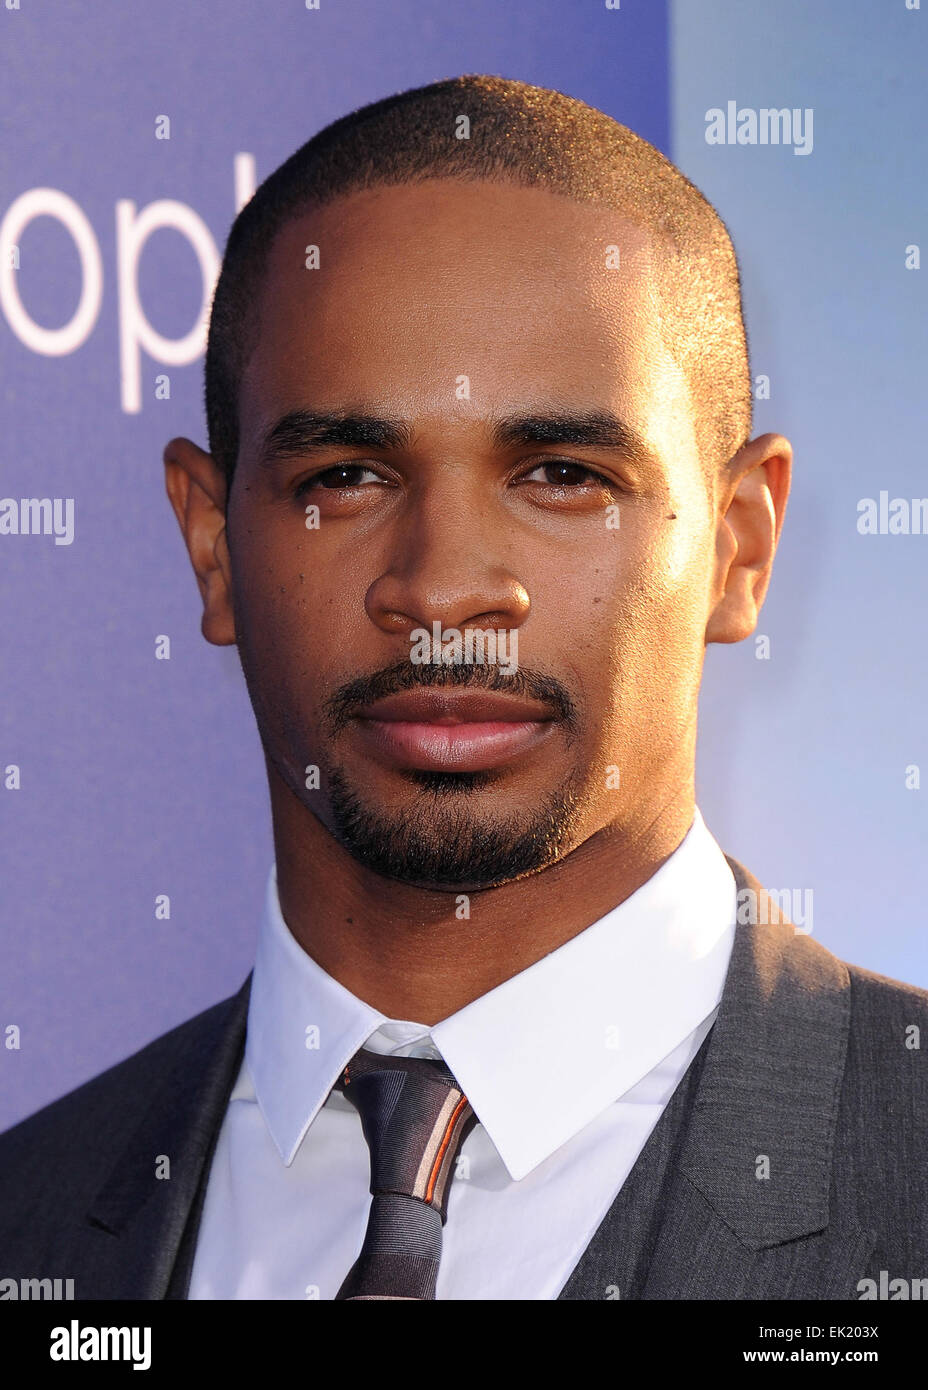 The 'Let's Be Cops' Los Angeles Premiere held at the ArcLight Hollywood on August 7, 2014 in Hollywood, California. Featuring: Damon Wayans Jr. Where: Los Angeles, California, United States When: 07 Aug 2014 Stock Photo